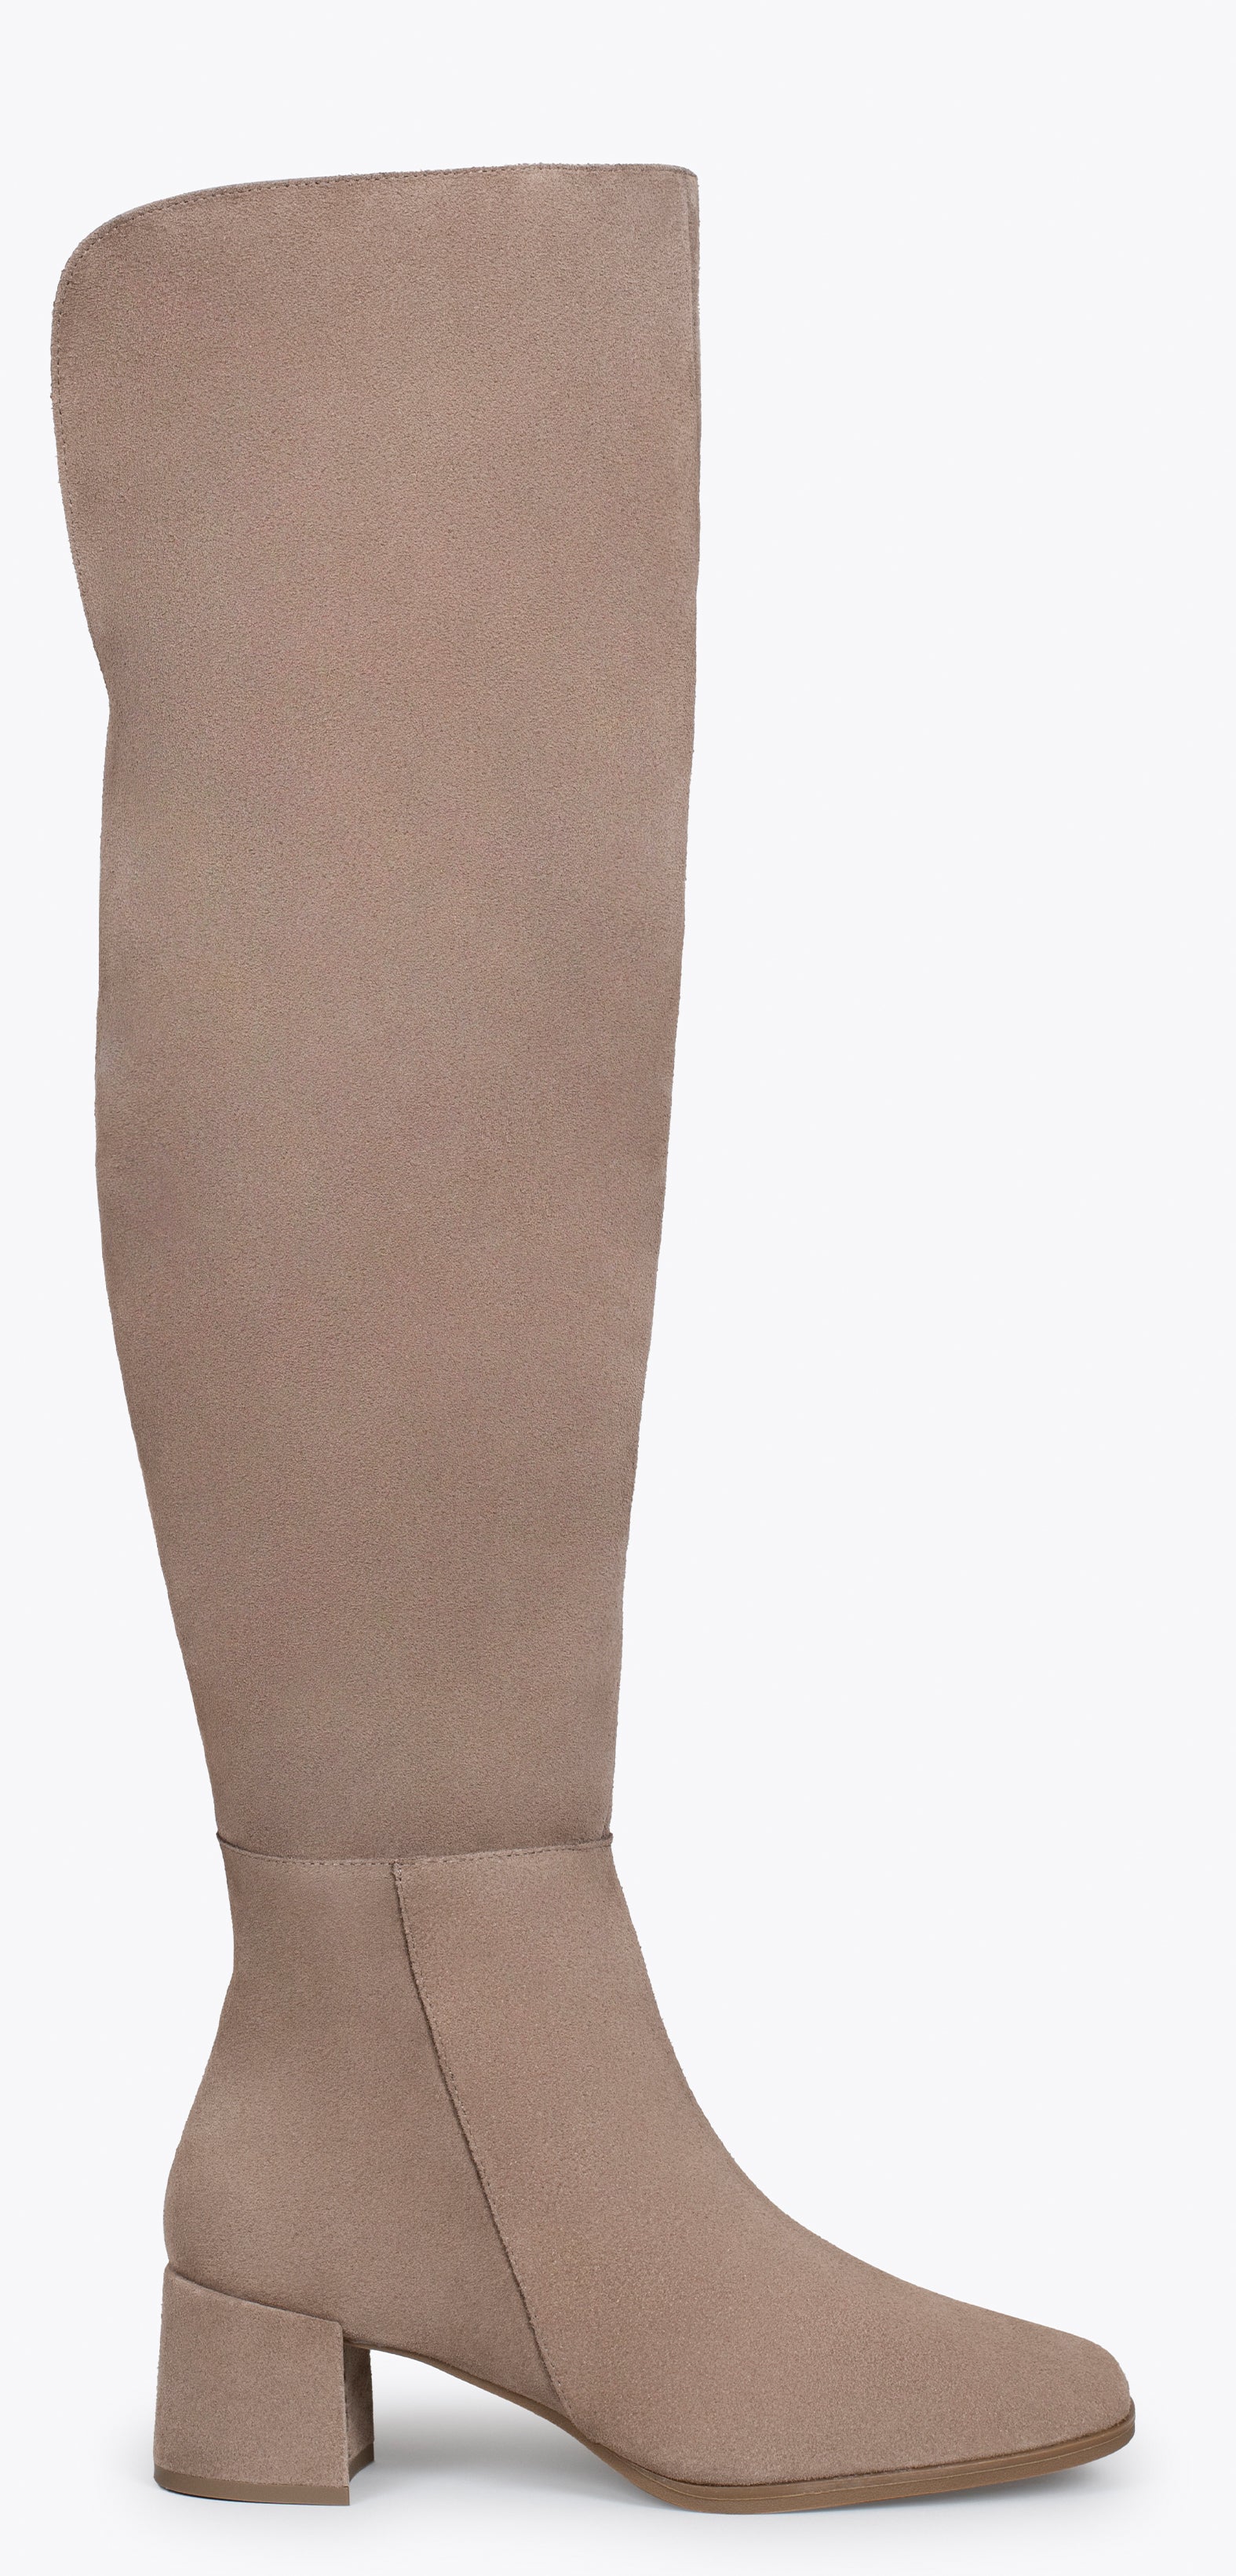 MUSKETEER – TAUPE over-the-knee boot